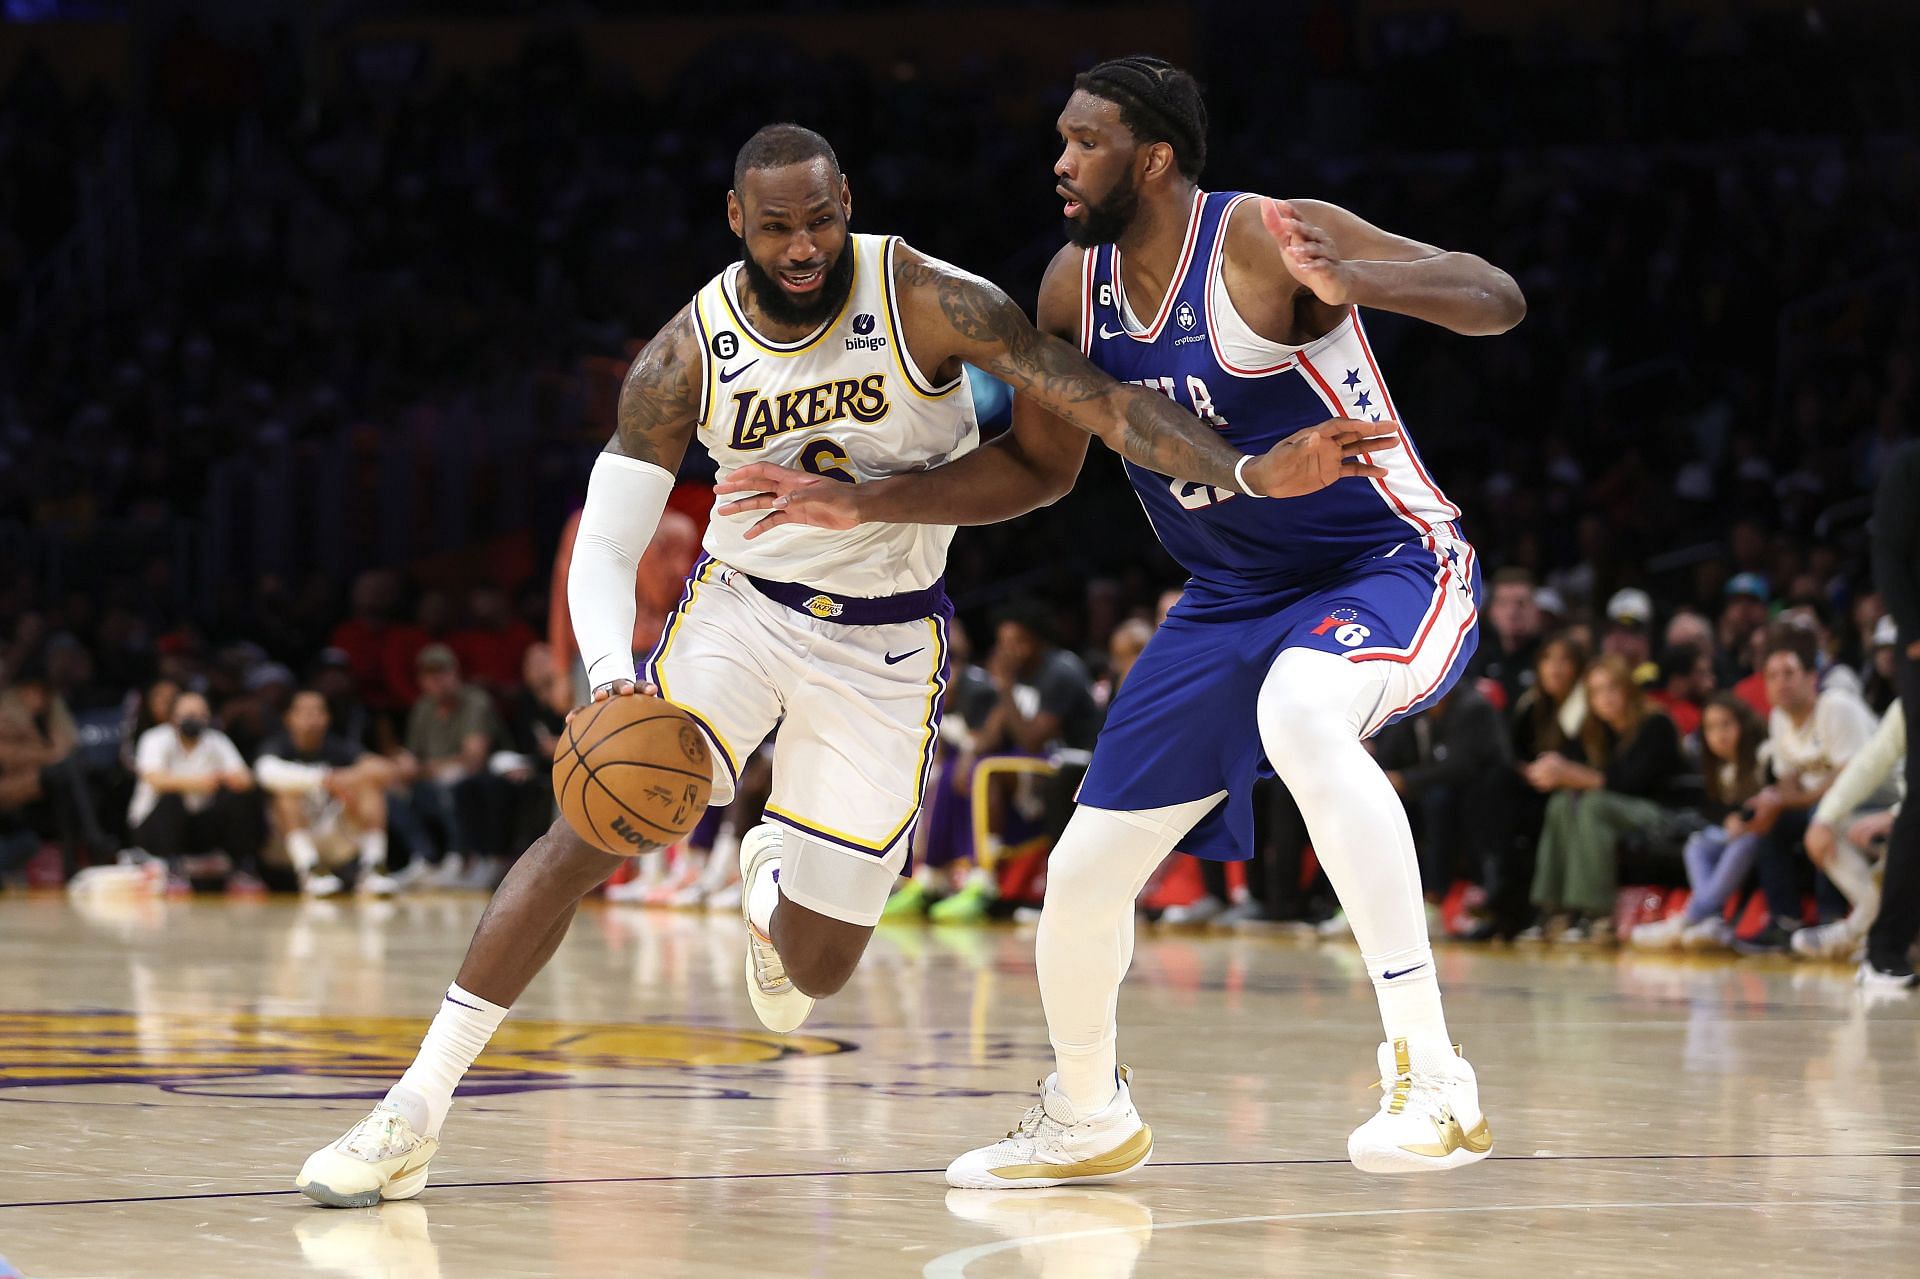 The 76ers can risk a &quot;win-now&quot; approach by clearing room for LeBron